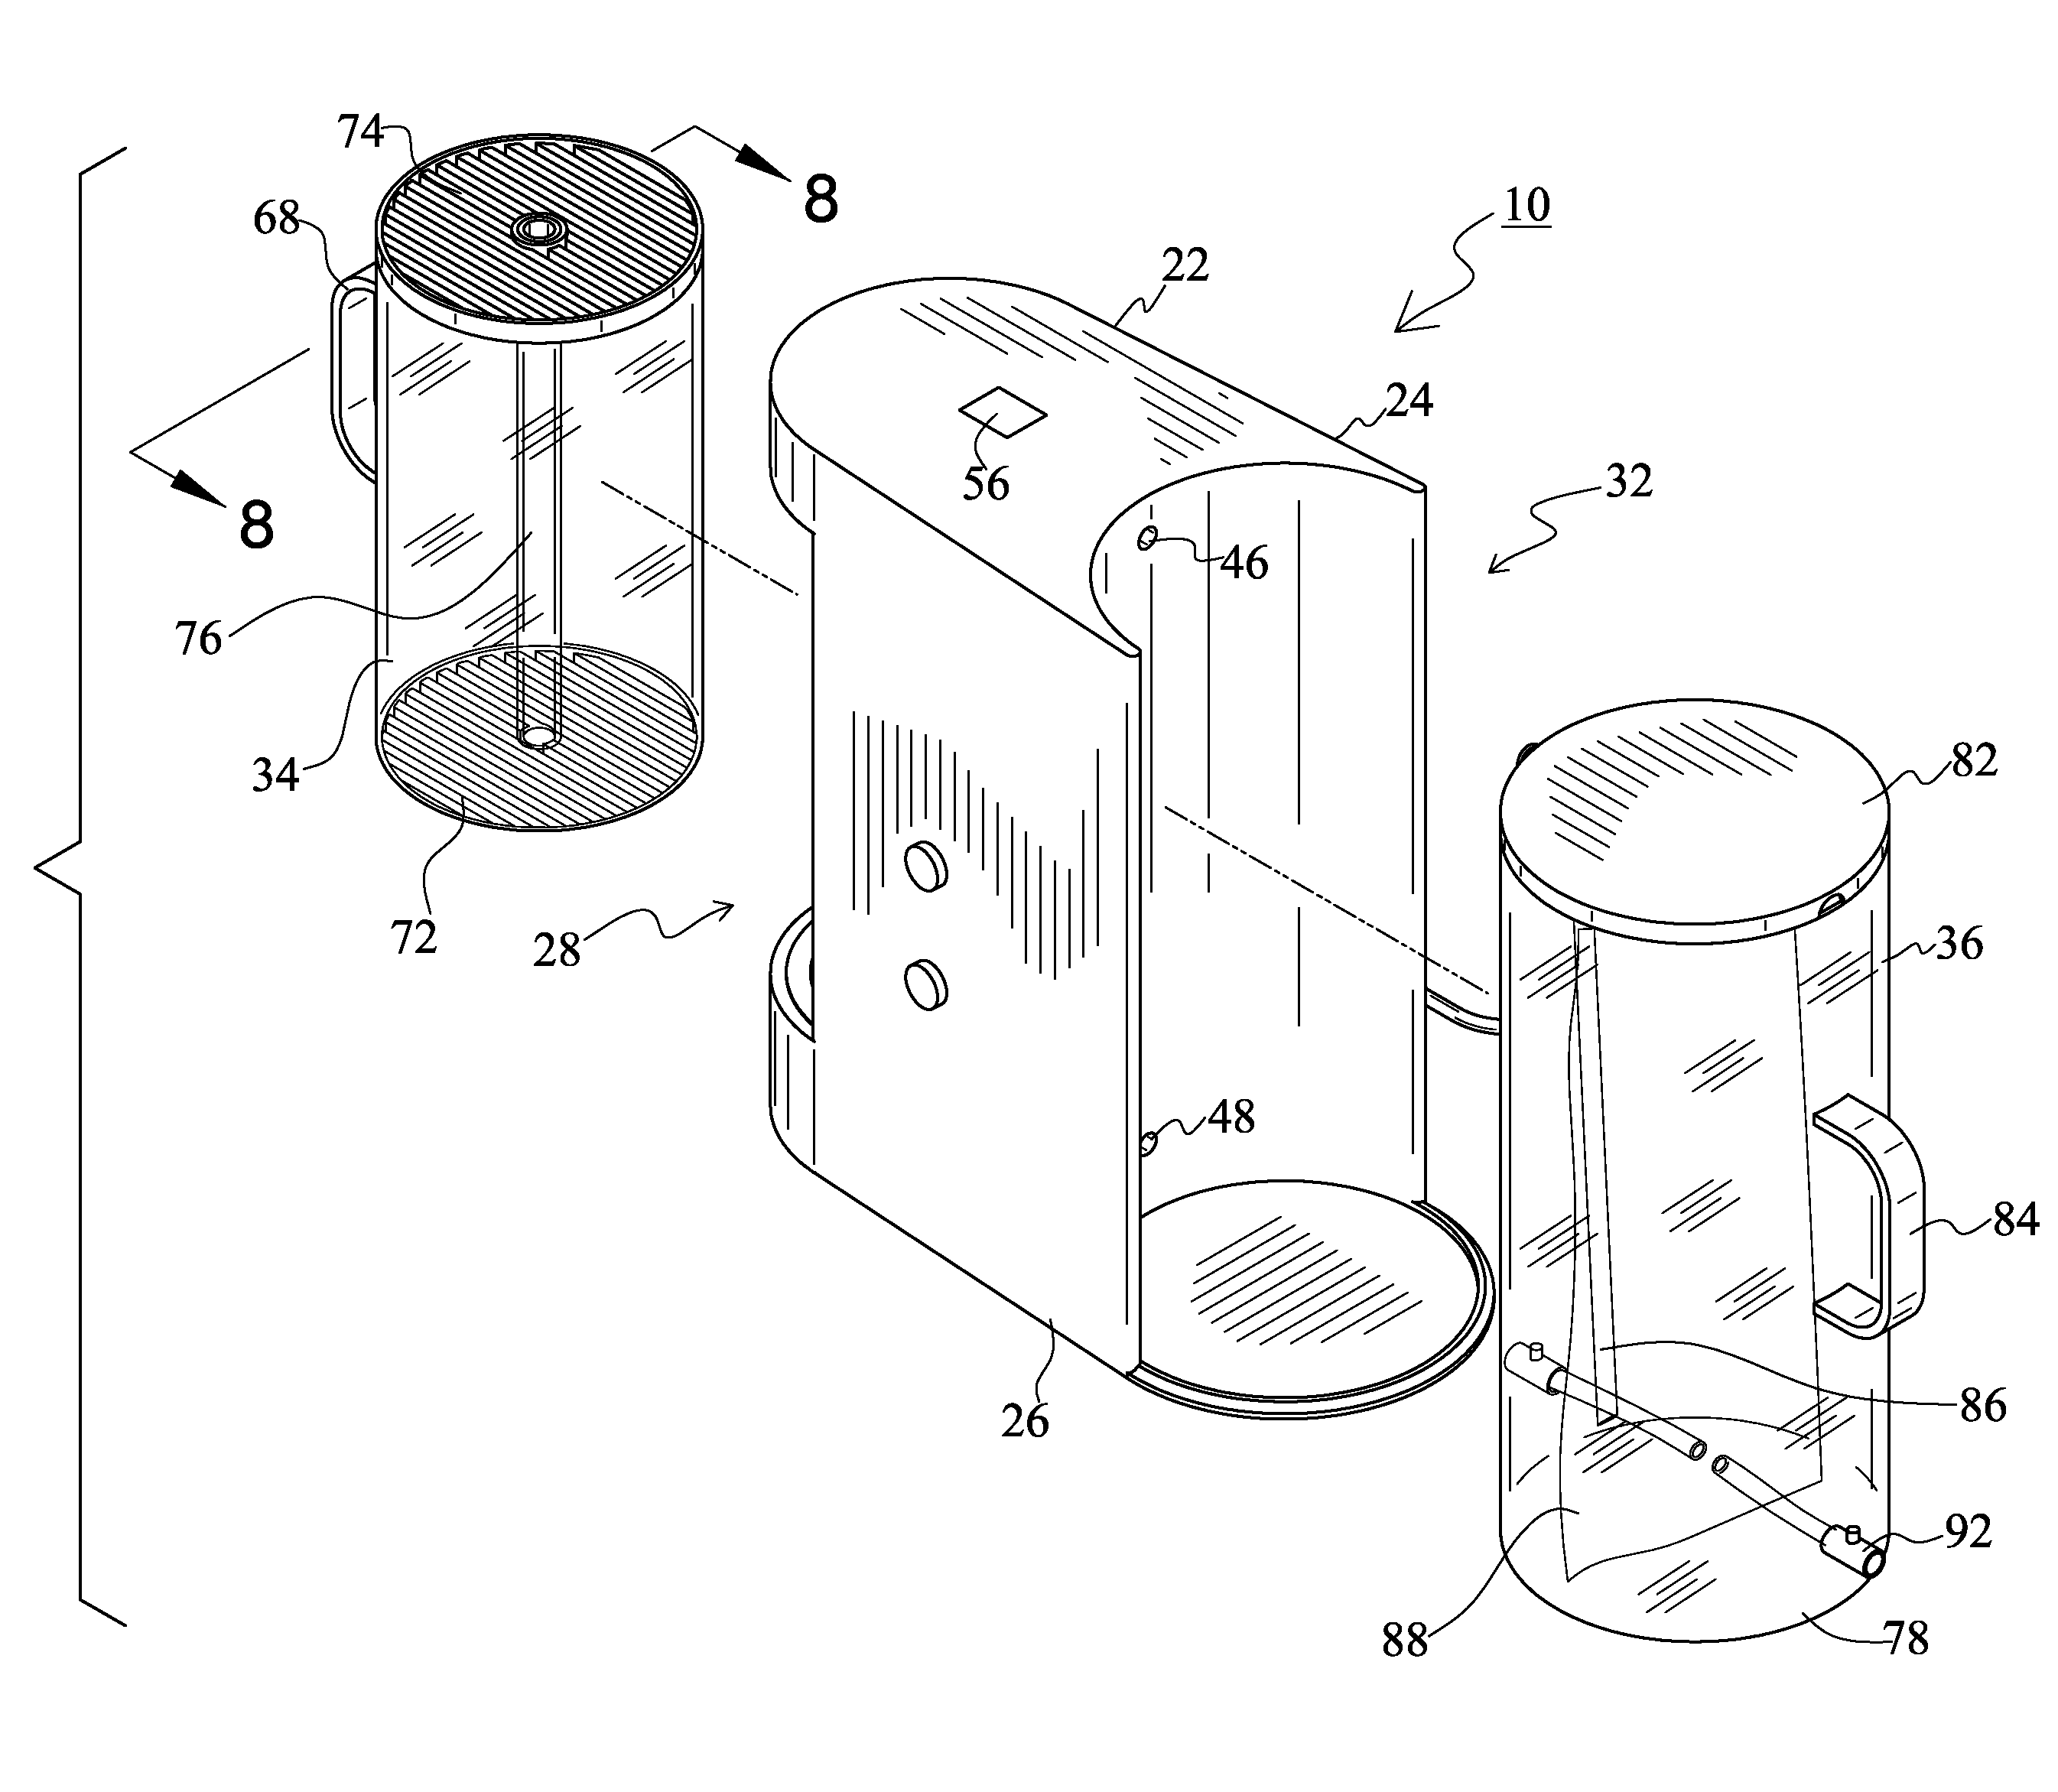 Apparatus for washing and sanitizing articles for an infant